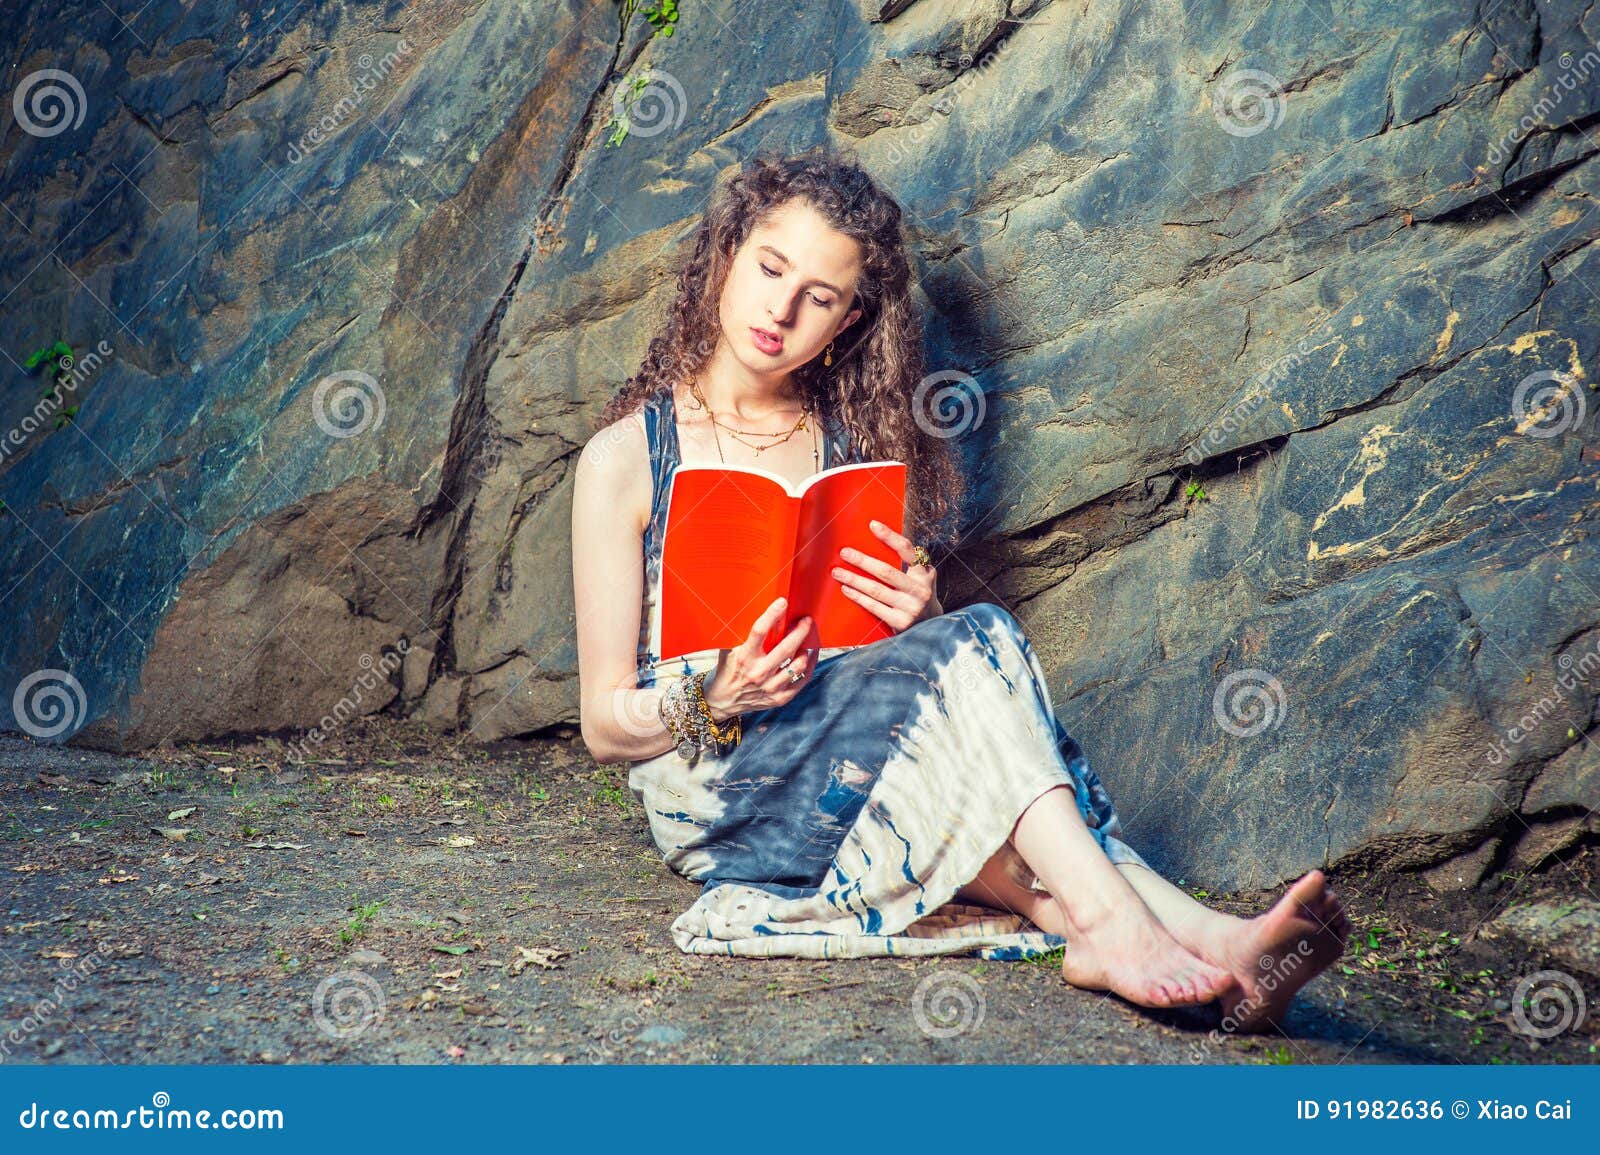 https://thumbs.dreamstime.com/z/young-american-woman-reading-red-book-sitting-ground-travel-girl-outside-wearing-long-dress-bracelet-barefoot-pretty-teenage-91982636.jpg